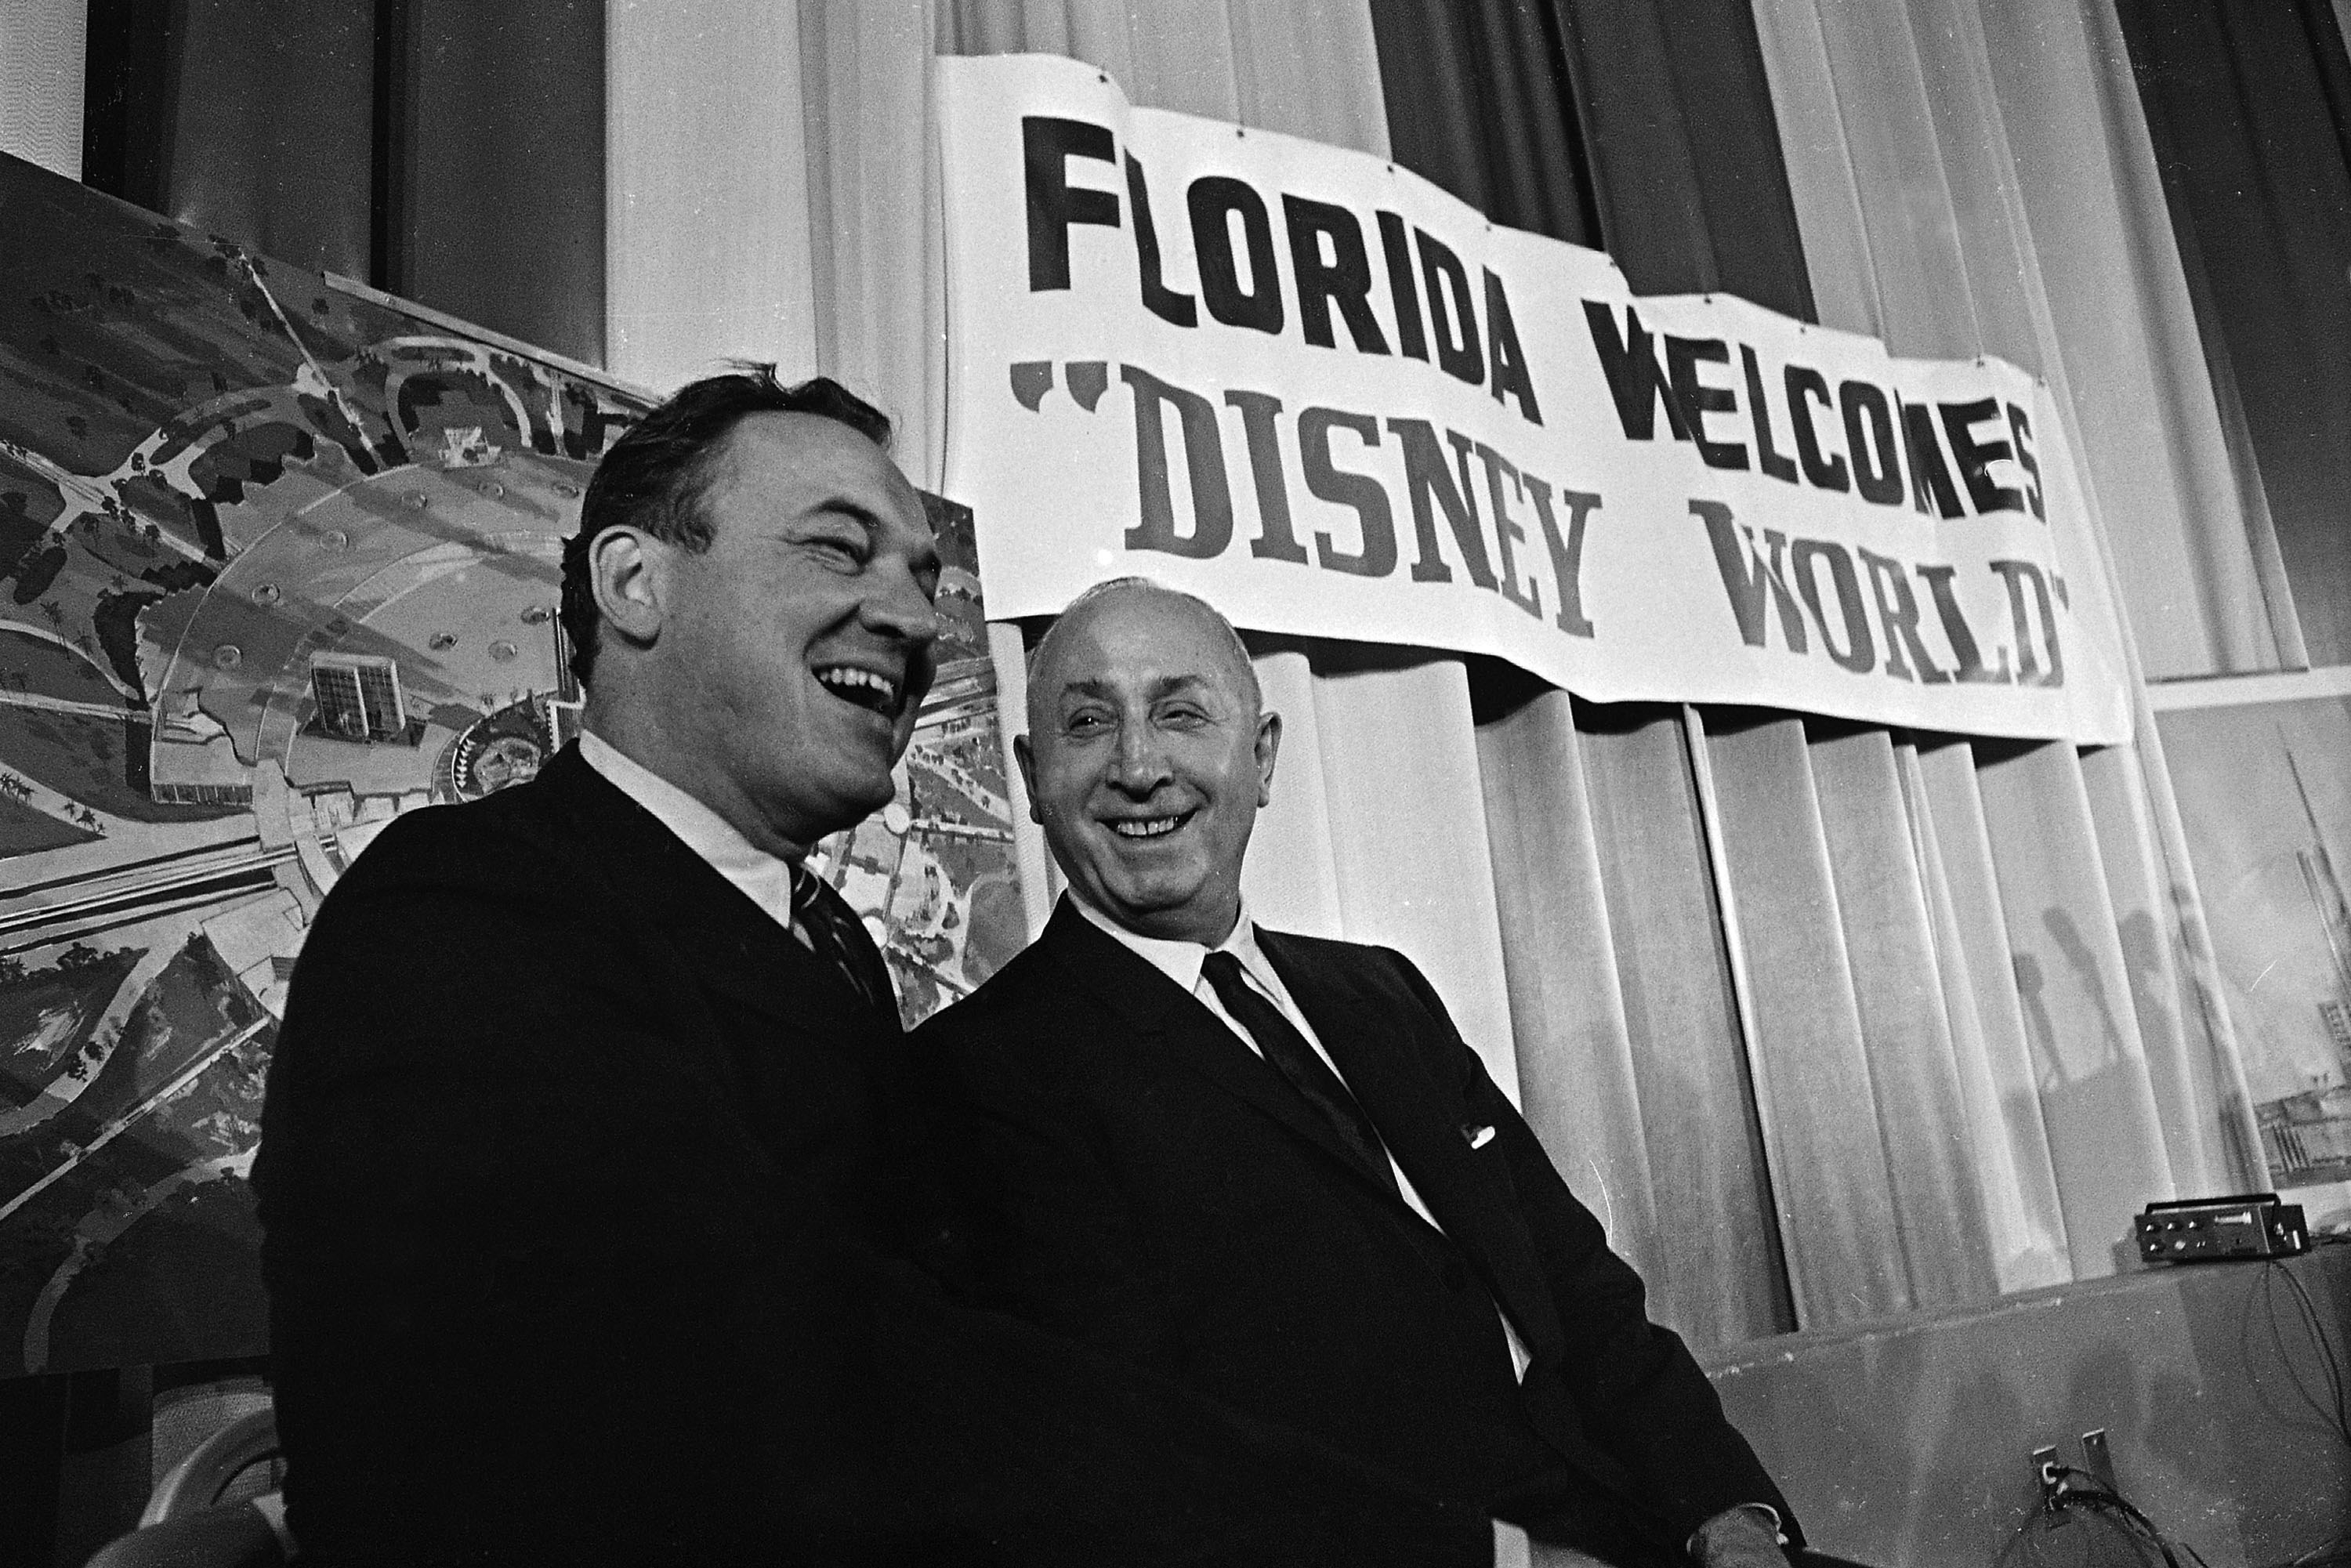 Two men dressed in suits - one the governor of Florida and the other Roy Disney - hold a press conference to announce the opening of Disney in Florida